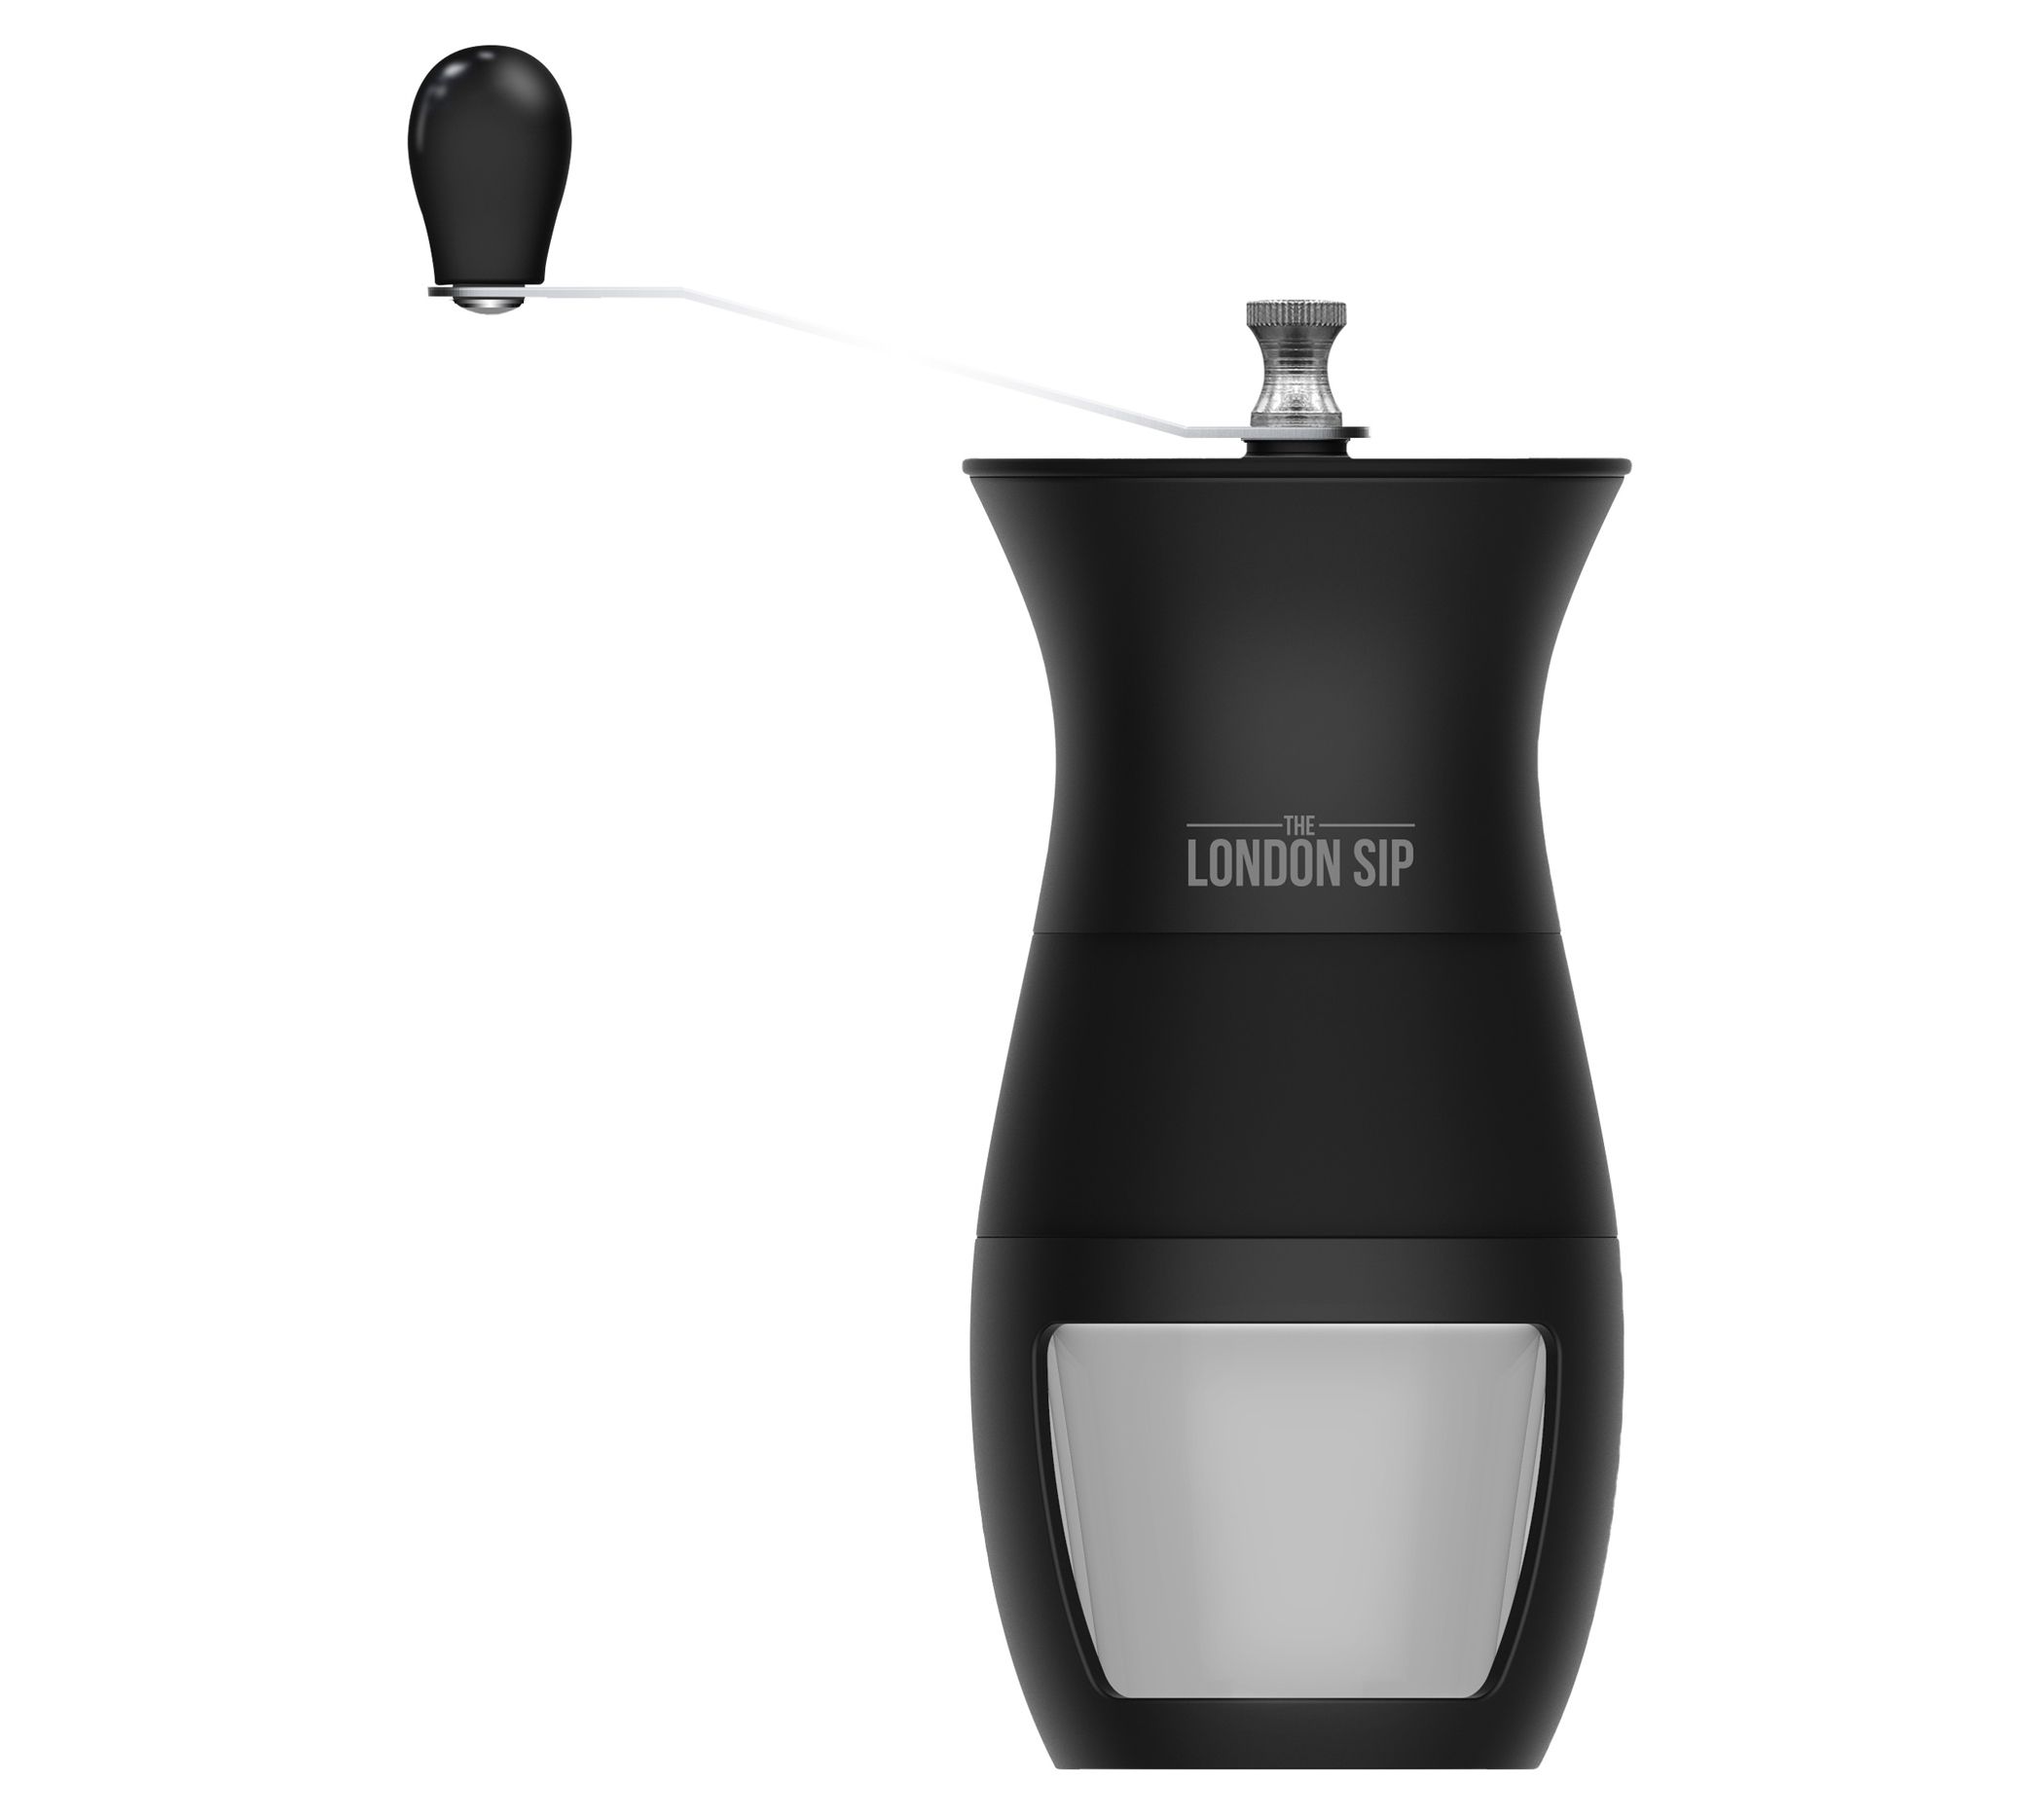 Kaffe Electric Coffee Grinder - Black - 3oz Capacity with Easy On